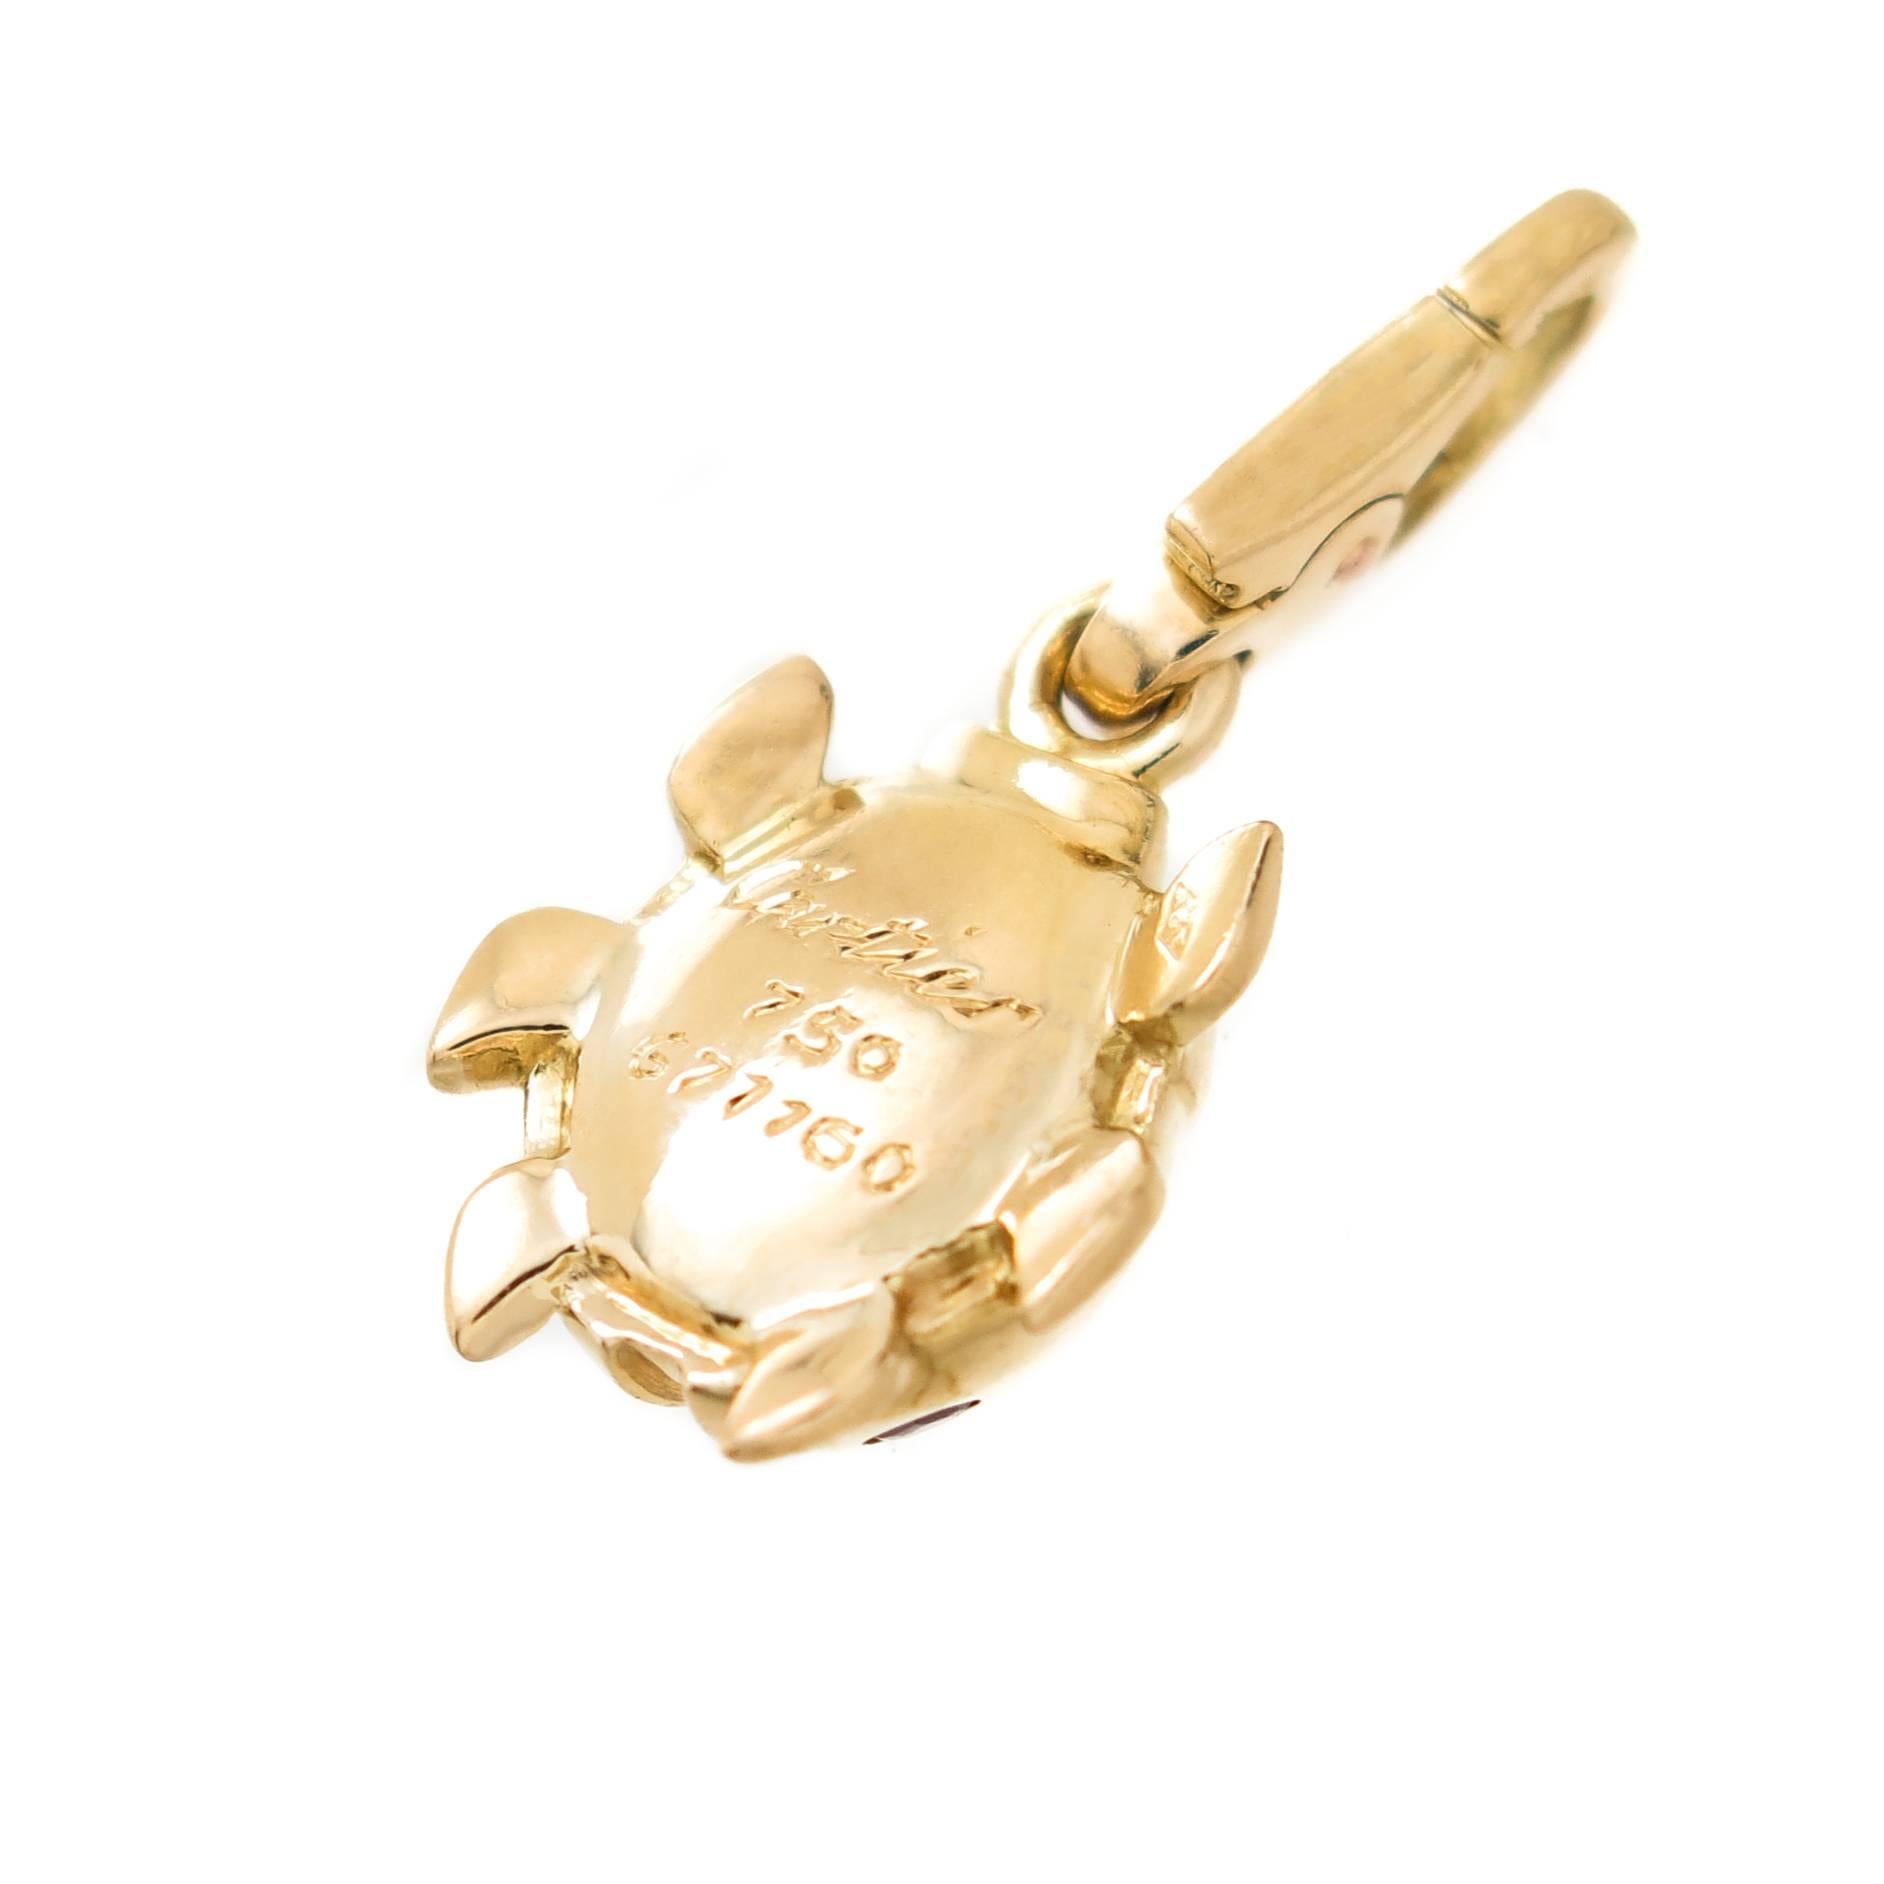 Circa 2000 Cartier 18K Yellow Gold Lady Bug Charm, measuring 1/2 inch in length X 3/8 inch and set with numerous Round Rubies. Having a lobster Claw Clasp so the Charm can be easily taken on or off to be worn on a Bracelet or a Necklace. 